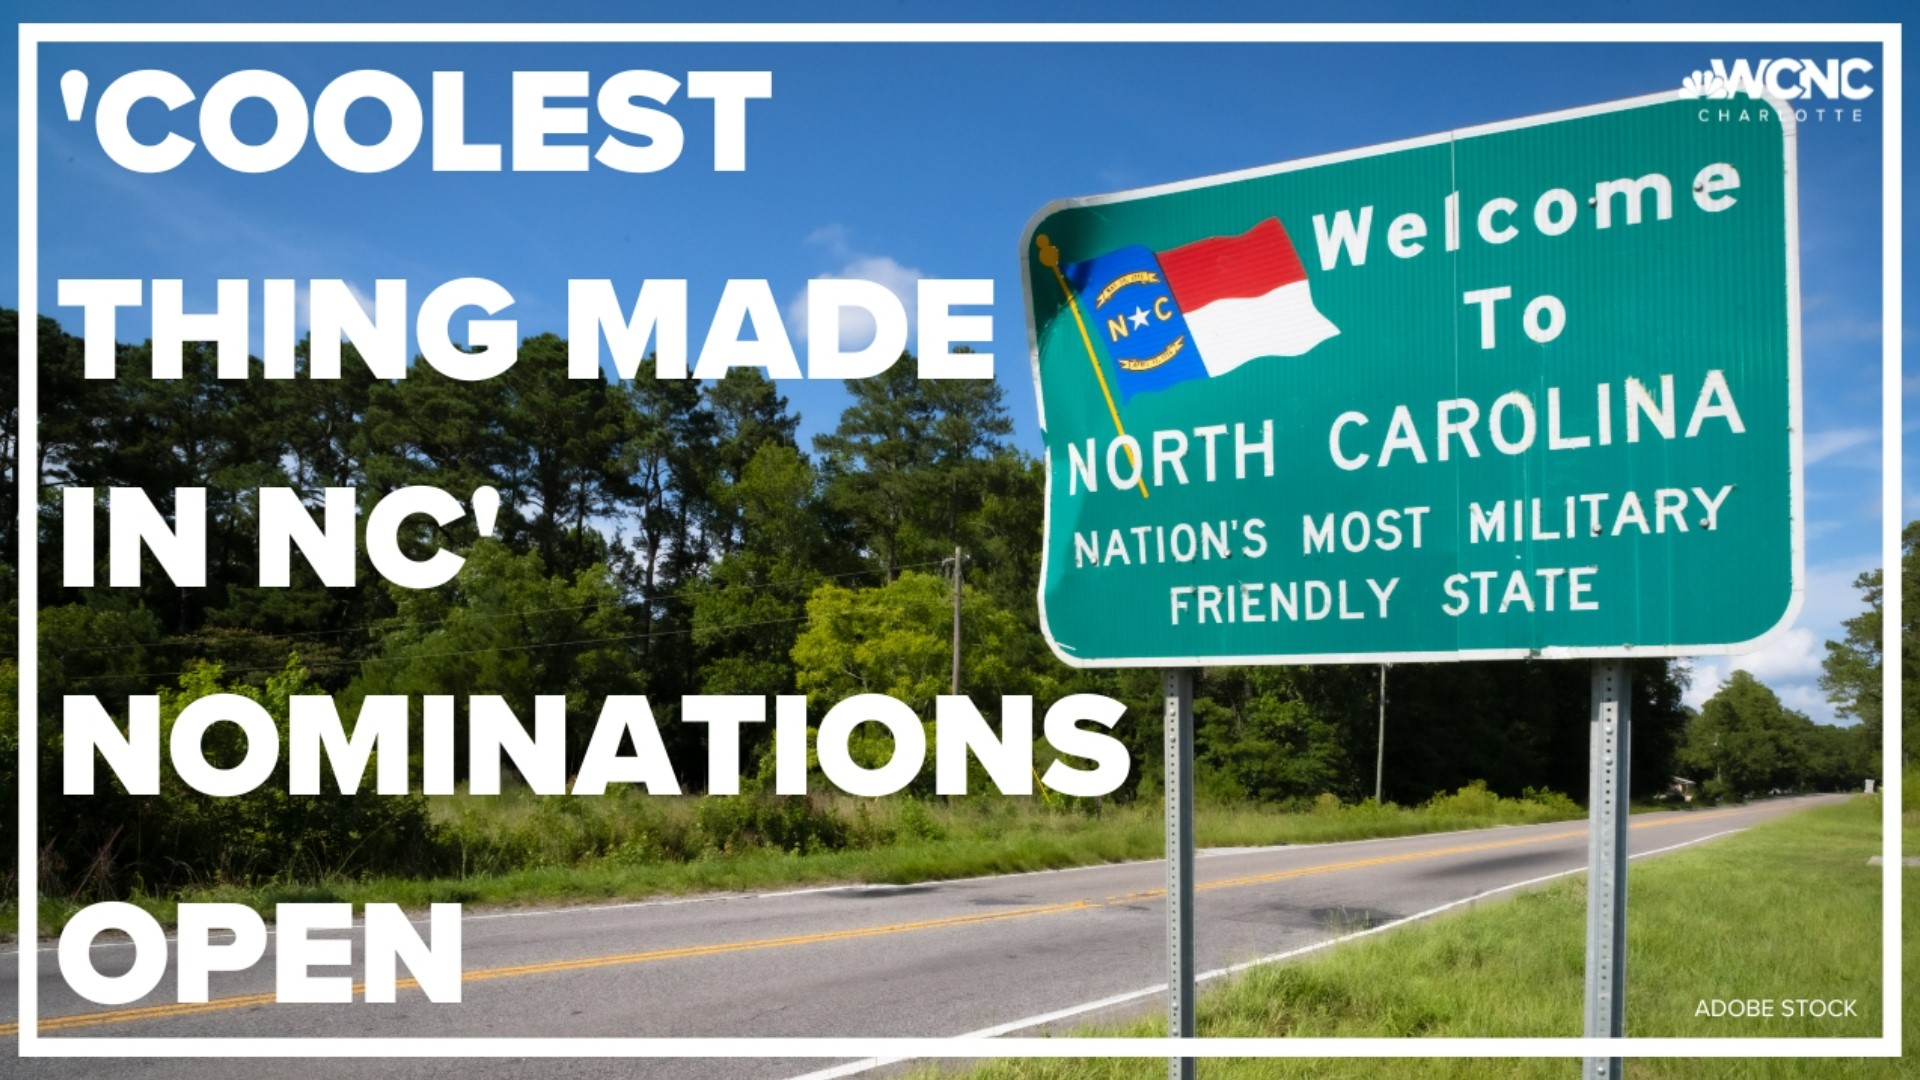 North Carolina has a lot of cool things, but can you think of the coolest thing in the Tar Heel state?